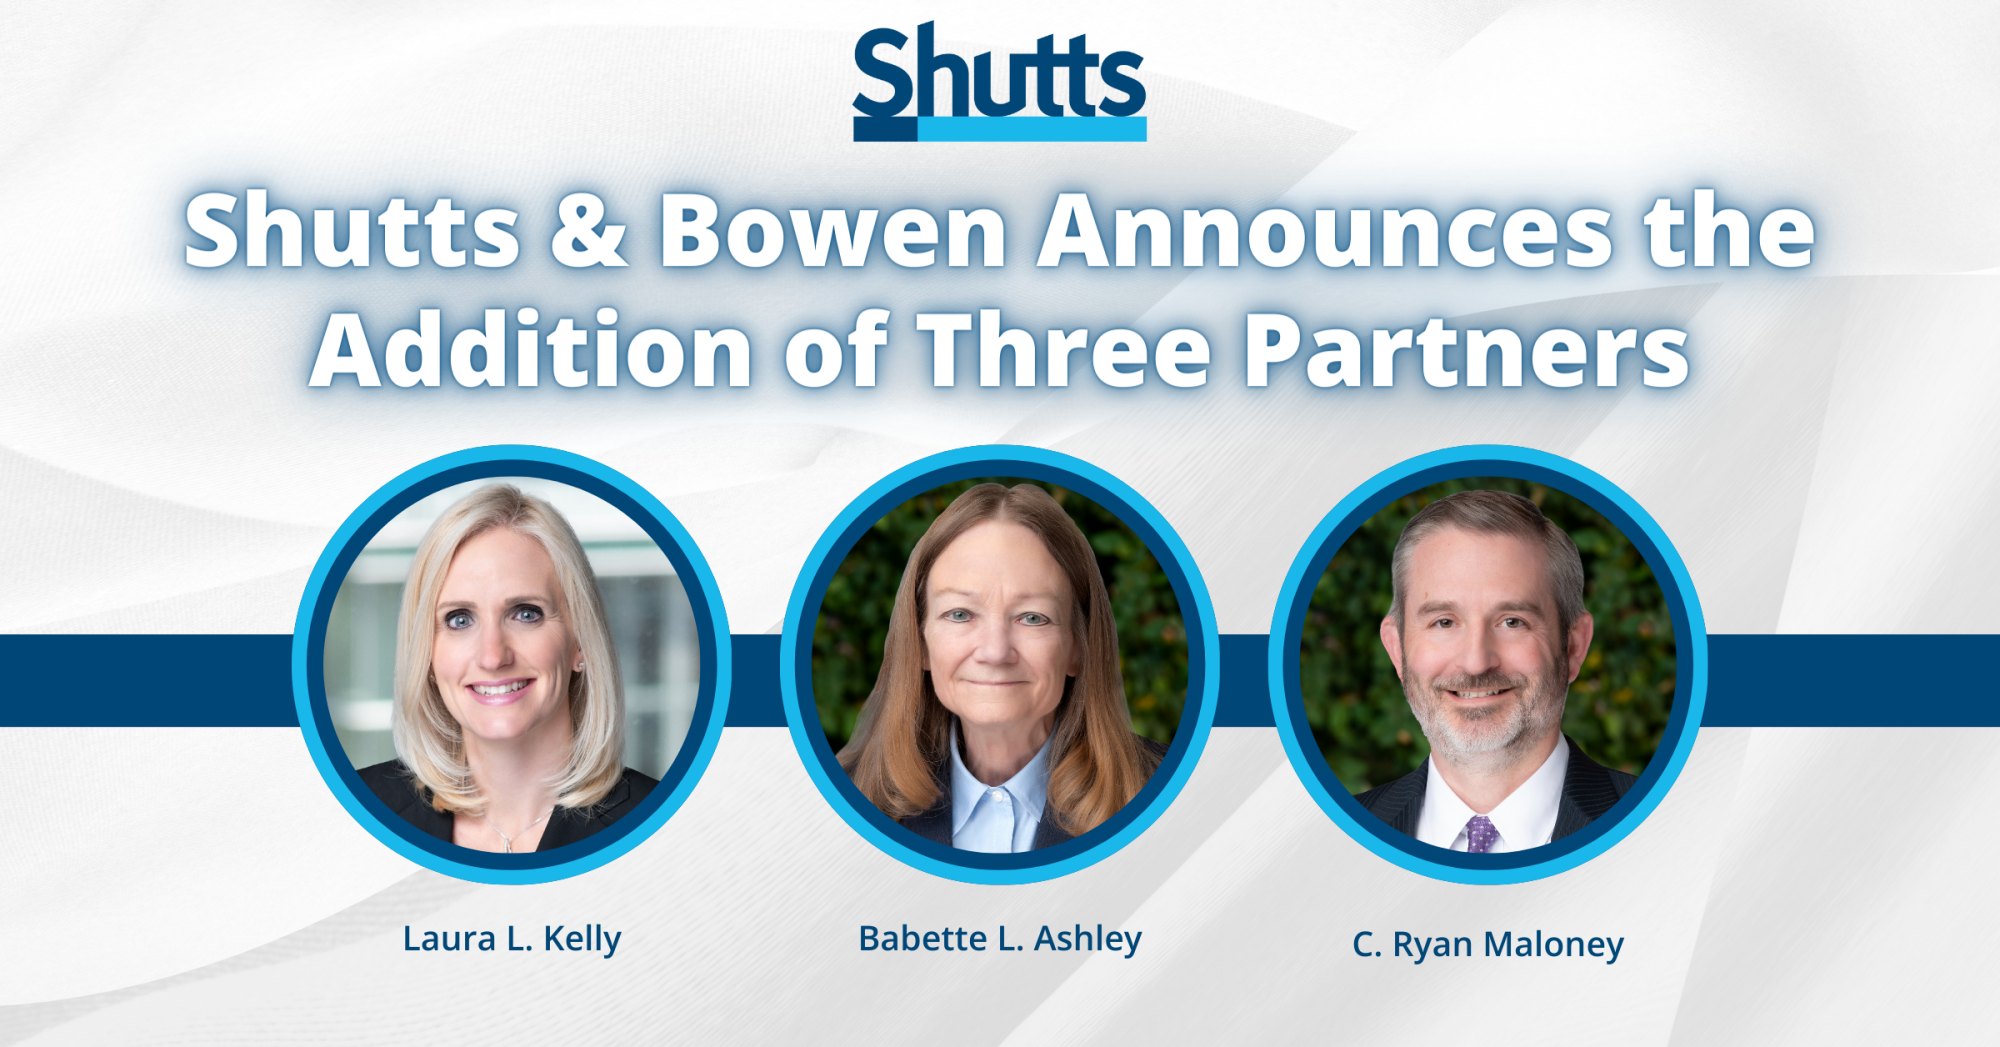 Shutts & Bowen Announces the Addition of Three Partners